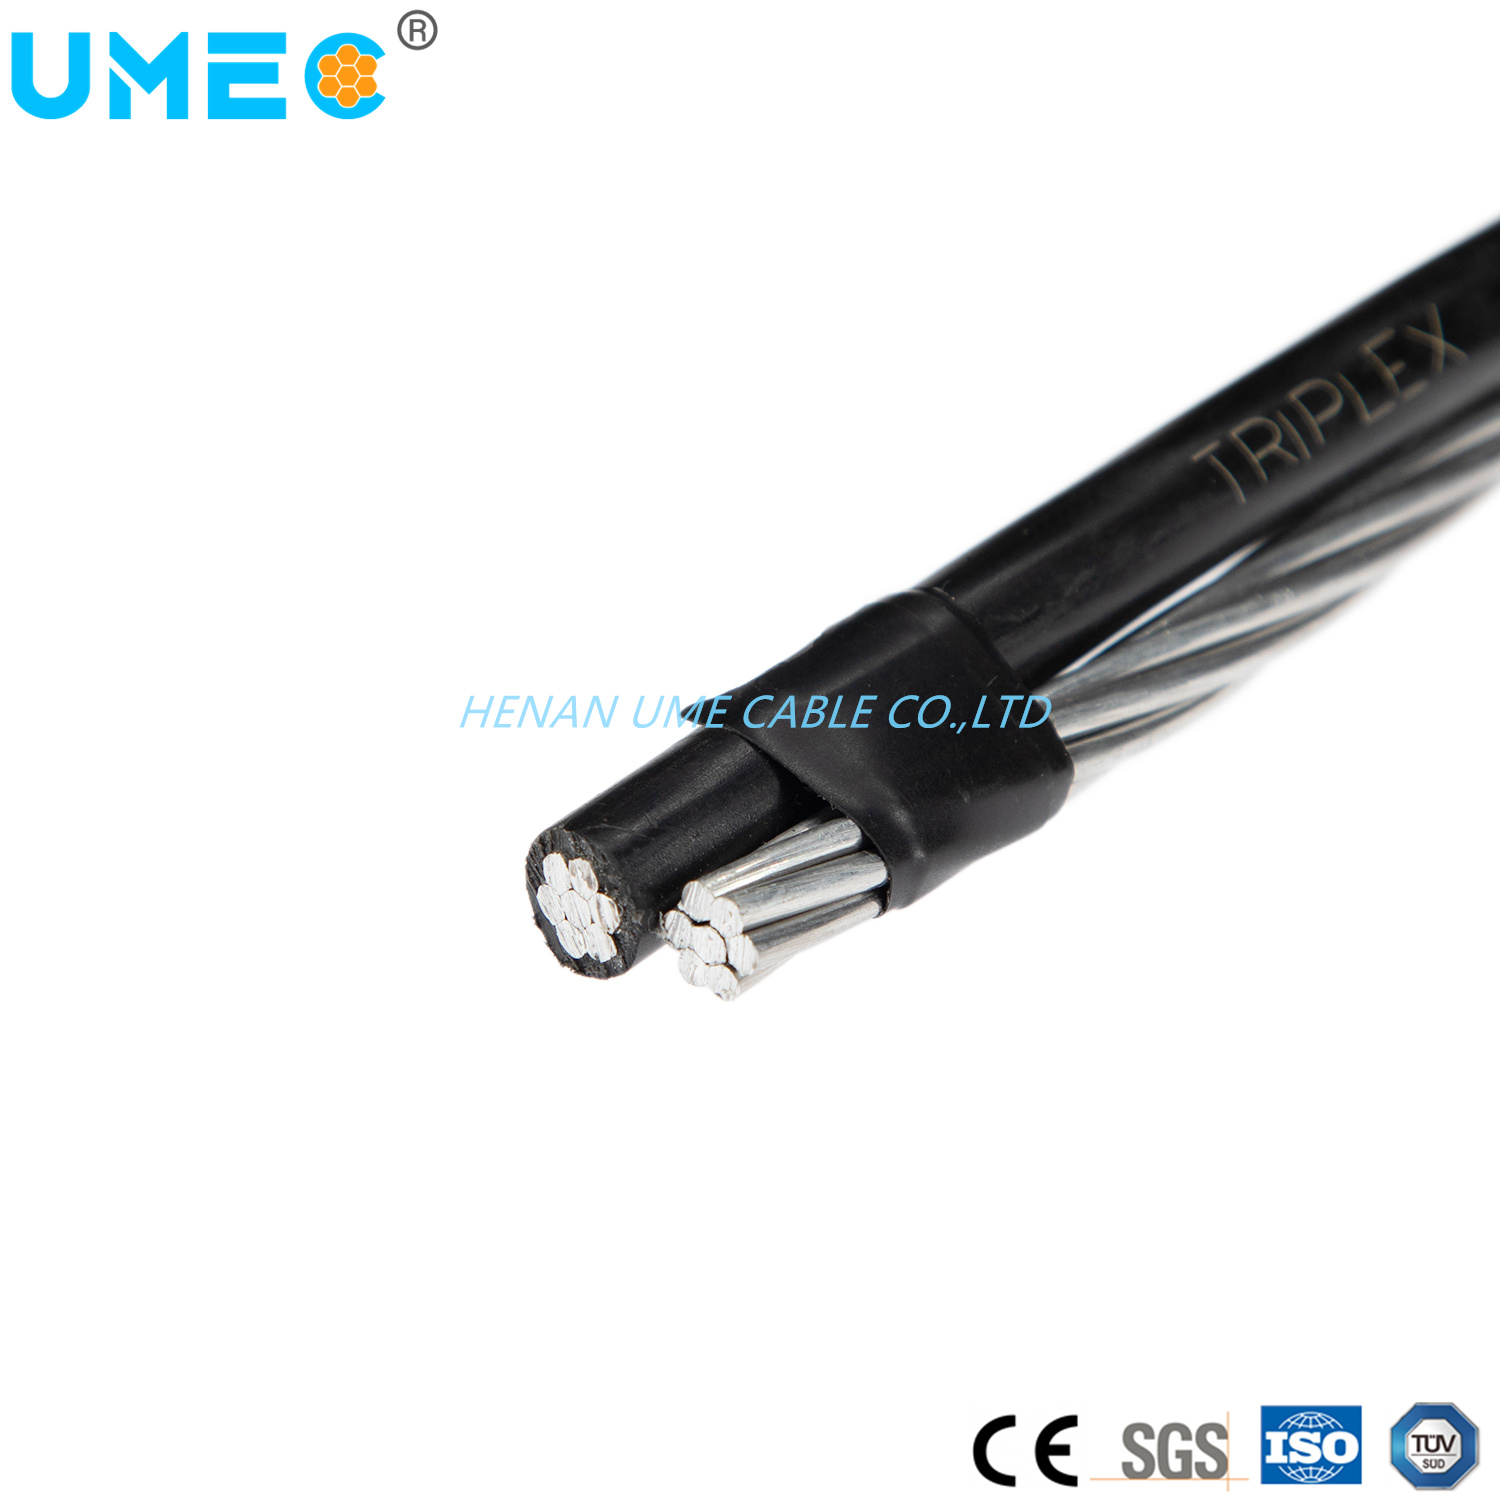 Transmission Line Electrical Aerial Bundled Cable Bare/PVC/PE/XLPE Insulated ABC Cable